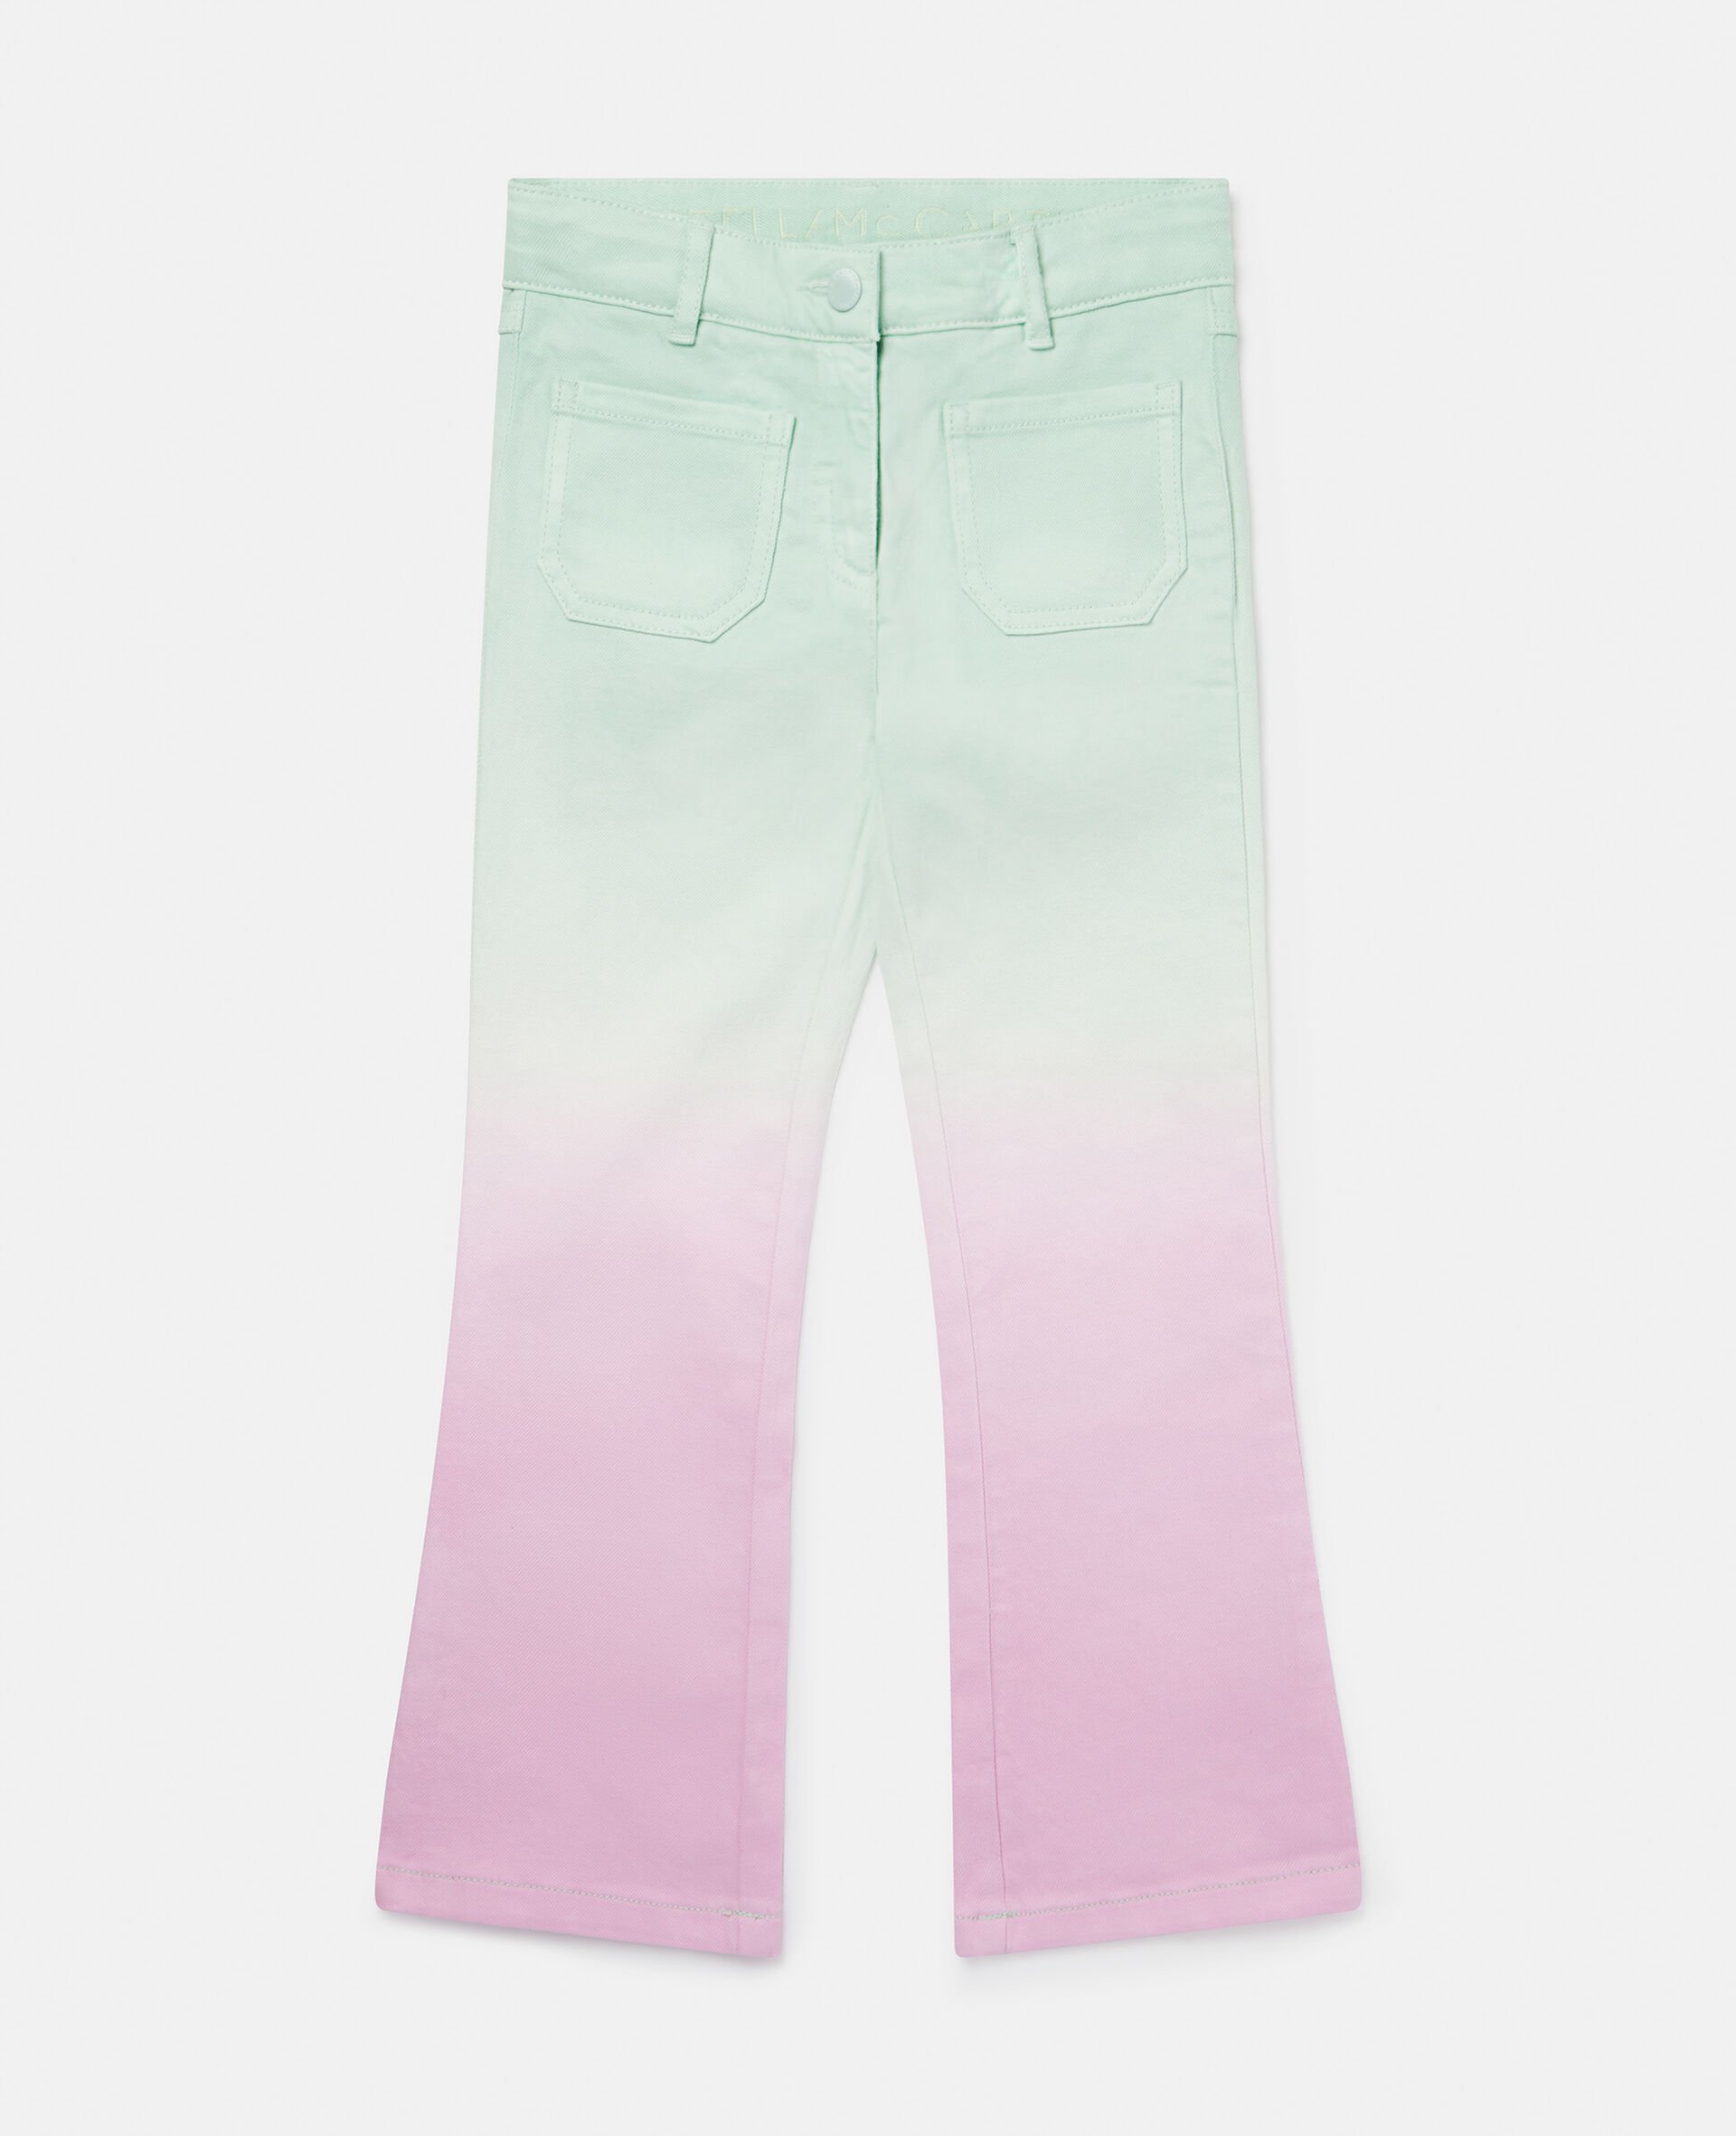 Ombré Patch Pocket Straight Leg Jeans-マルチカラー-large image number 0